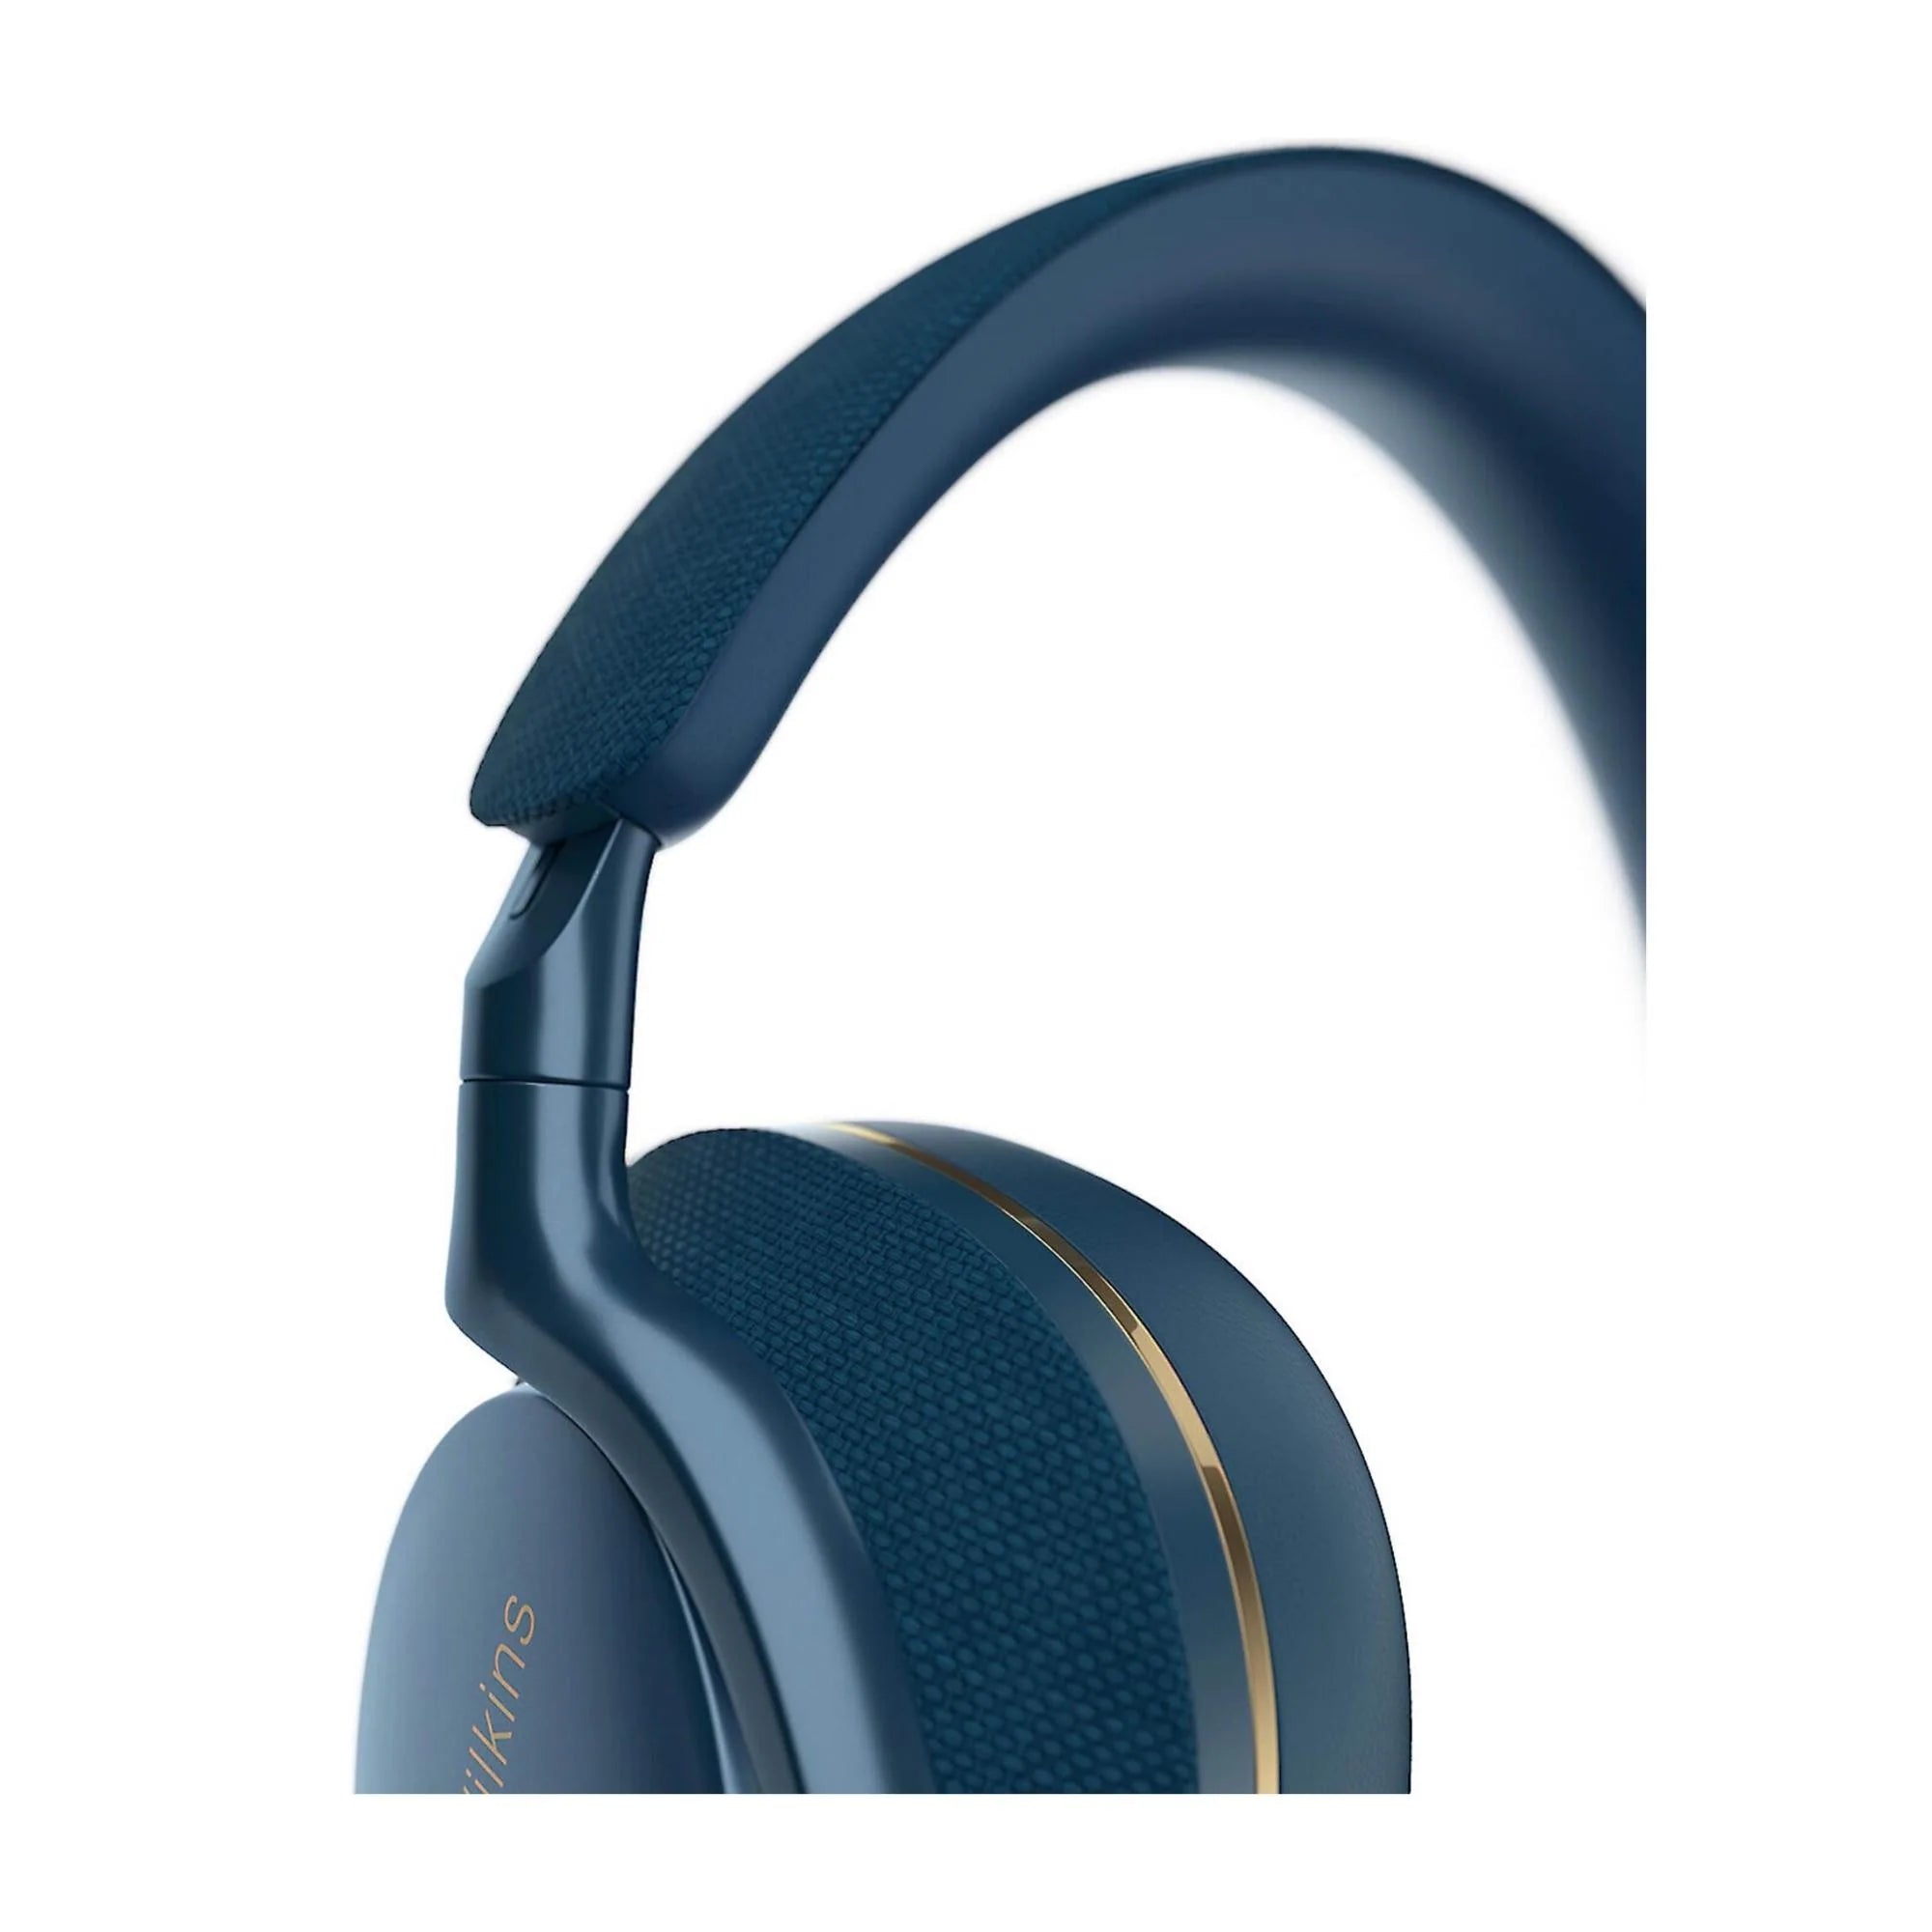 Bowers & Wilkins PX7 S2 Noise-Cancelling Wireless Headphones